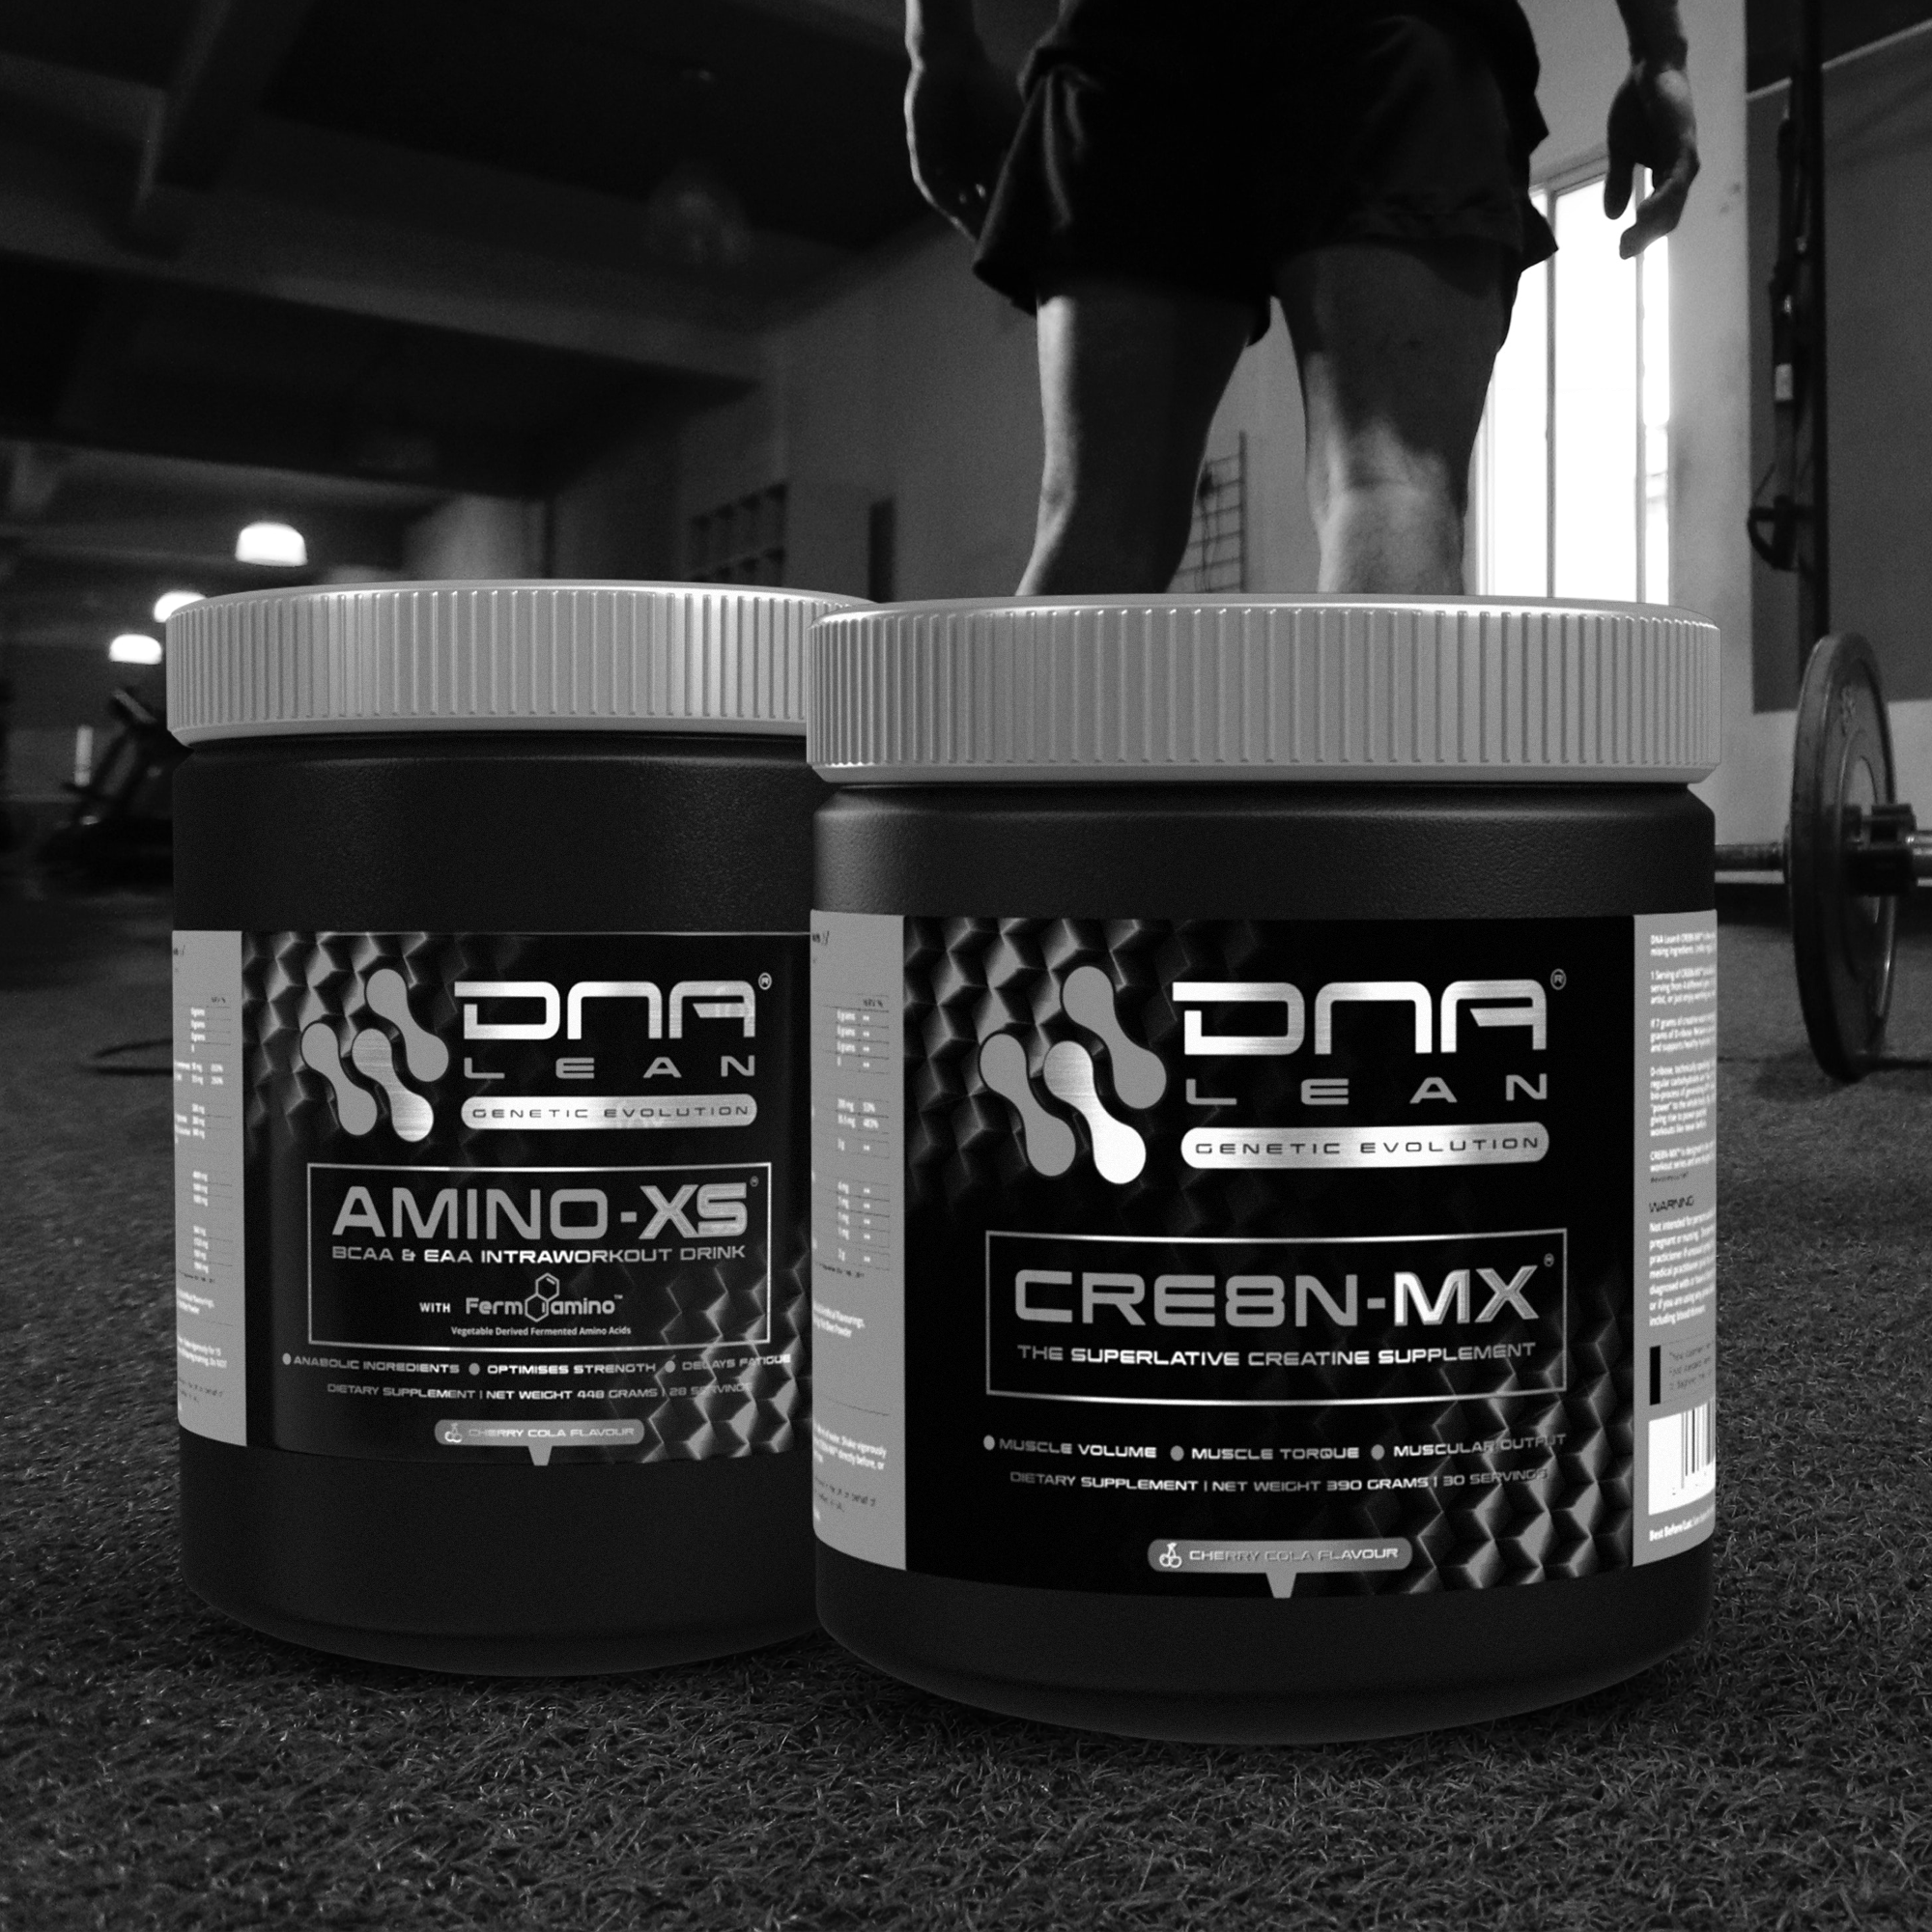 Workout Stack: Amino-XS + CRE8N-MX (SAVE 10%)